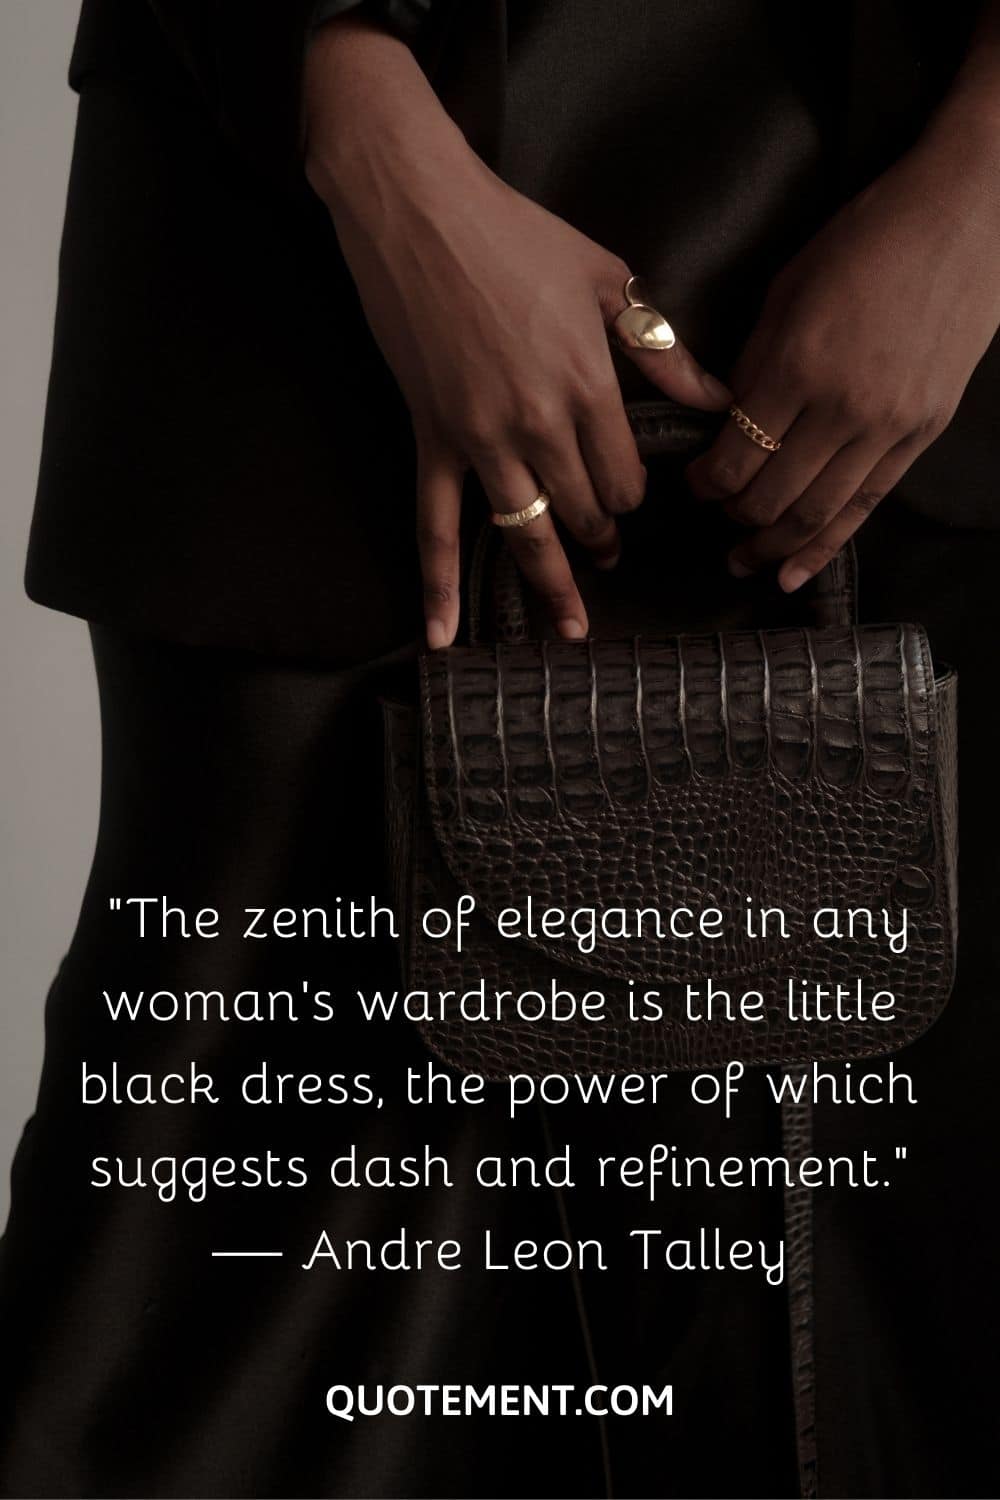 The zenith of elegance in any woman’s wardrobe is the little black dress